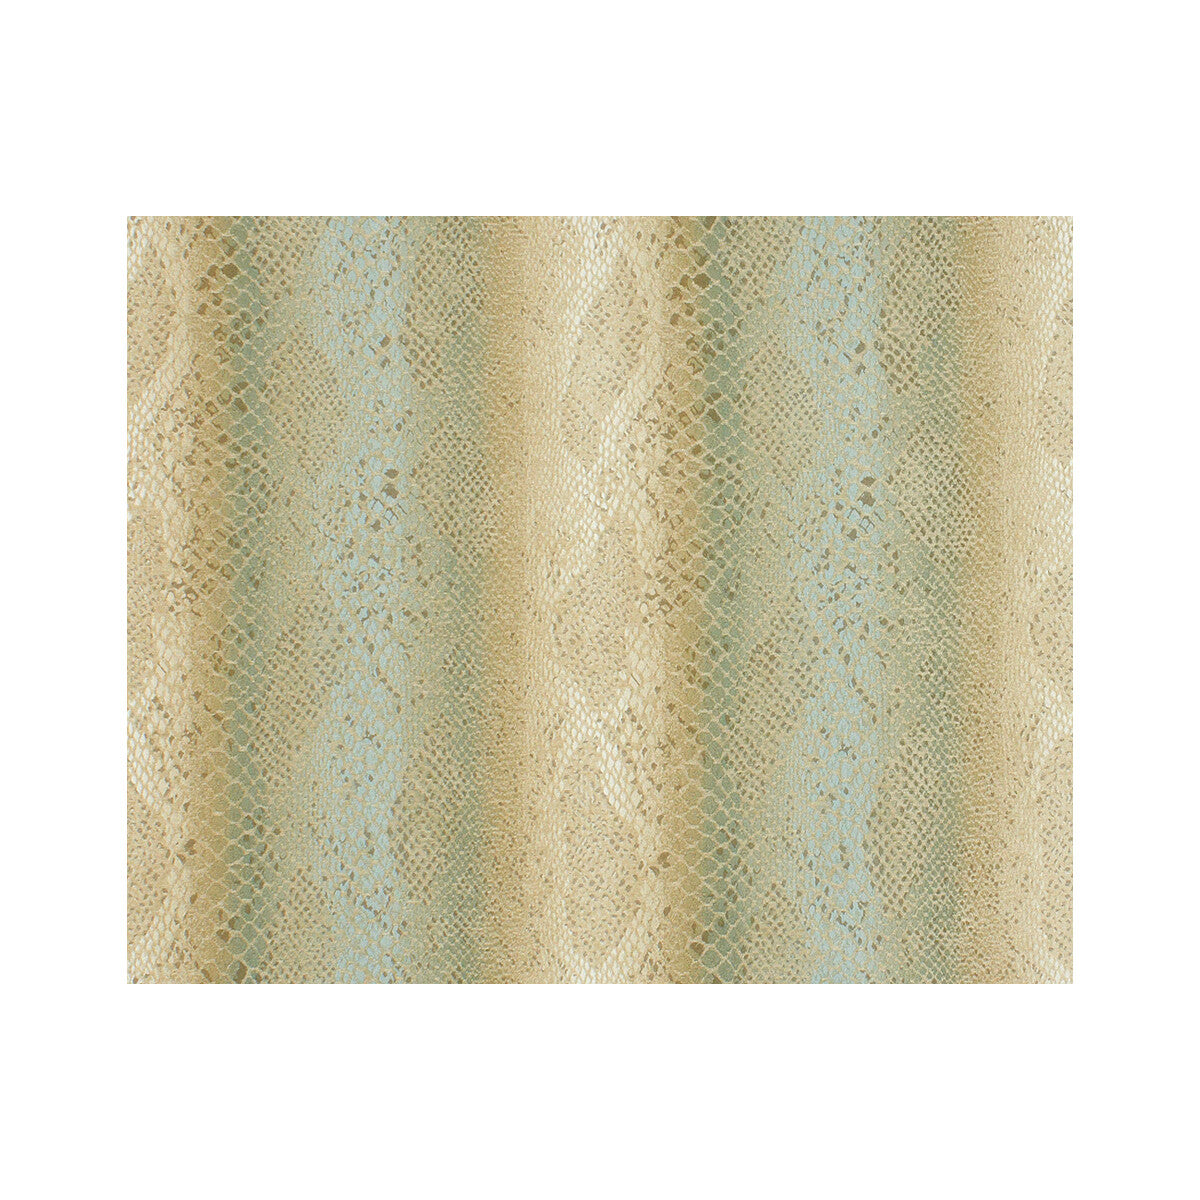 Lizard Envy fabric in mineral color - pattern 33276.1635.0 - by Kravet Couture